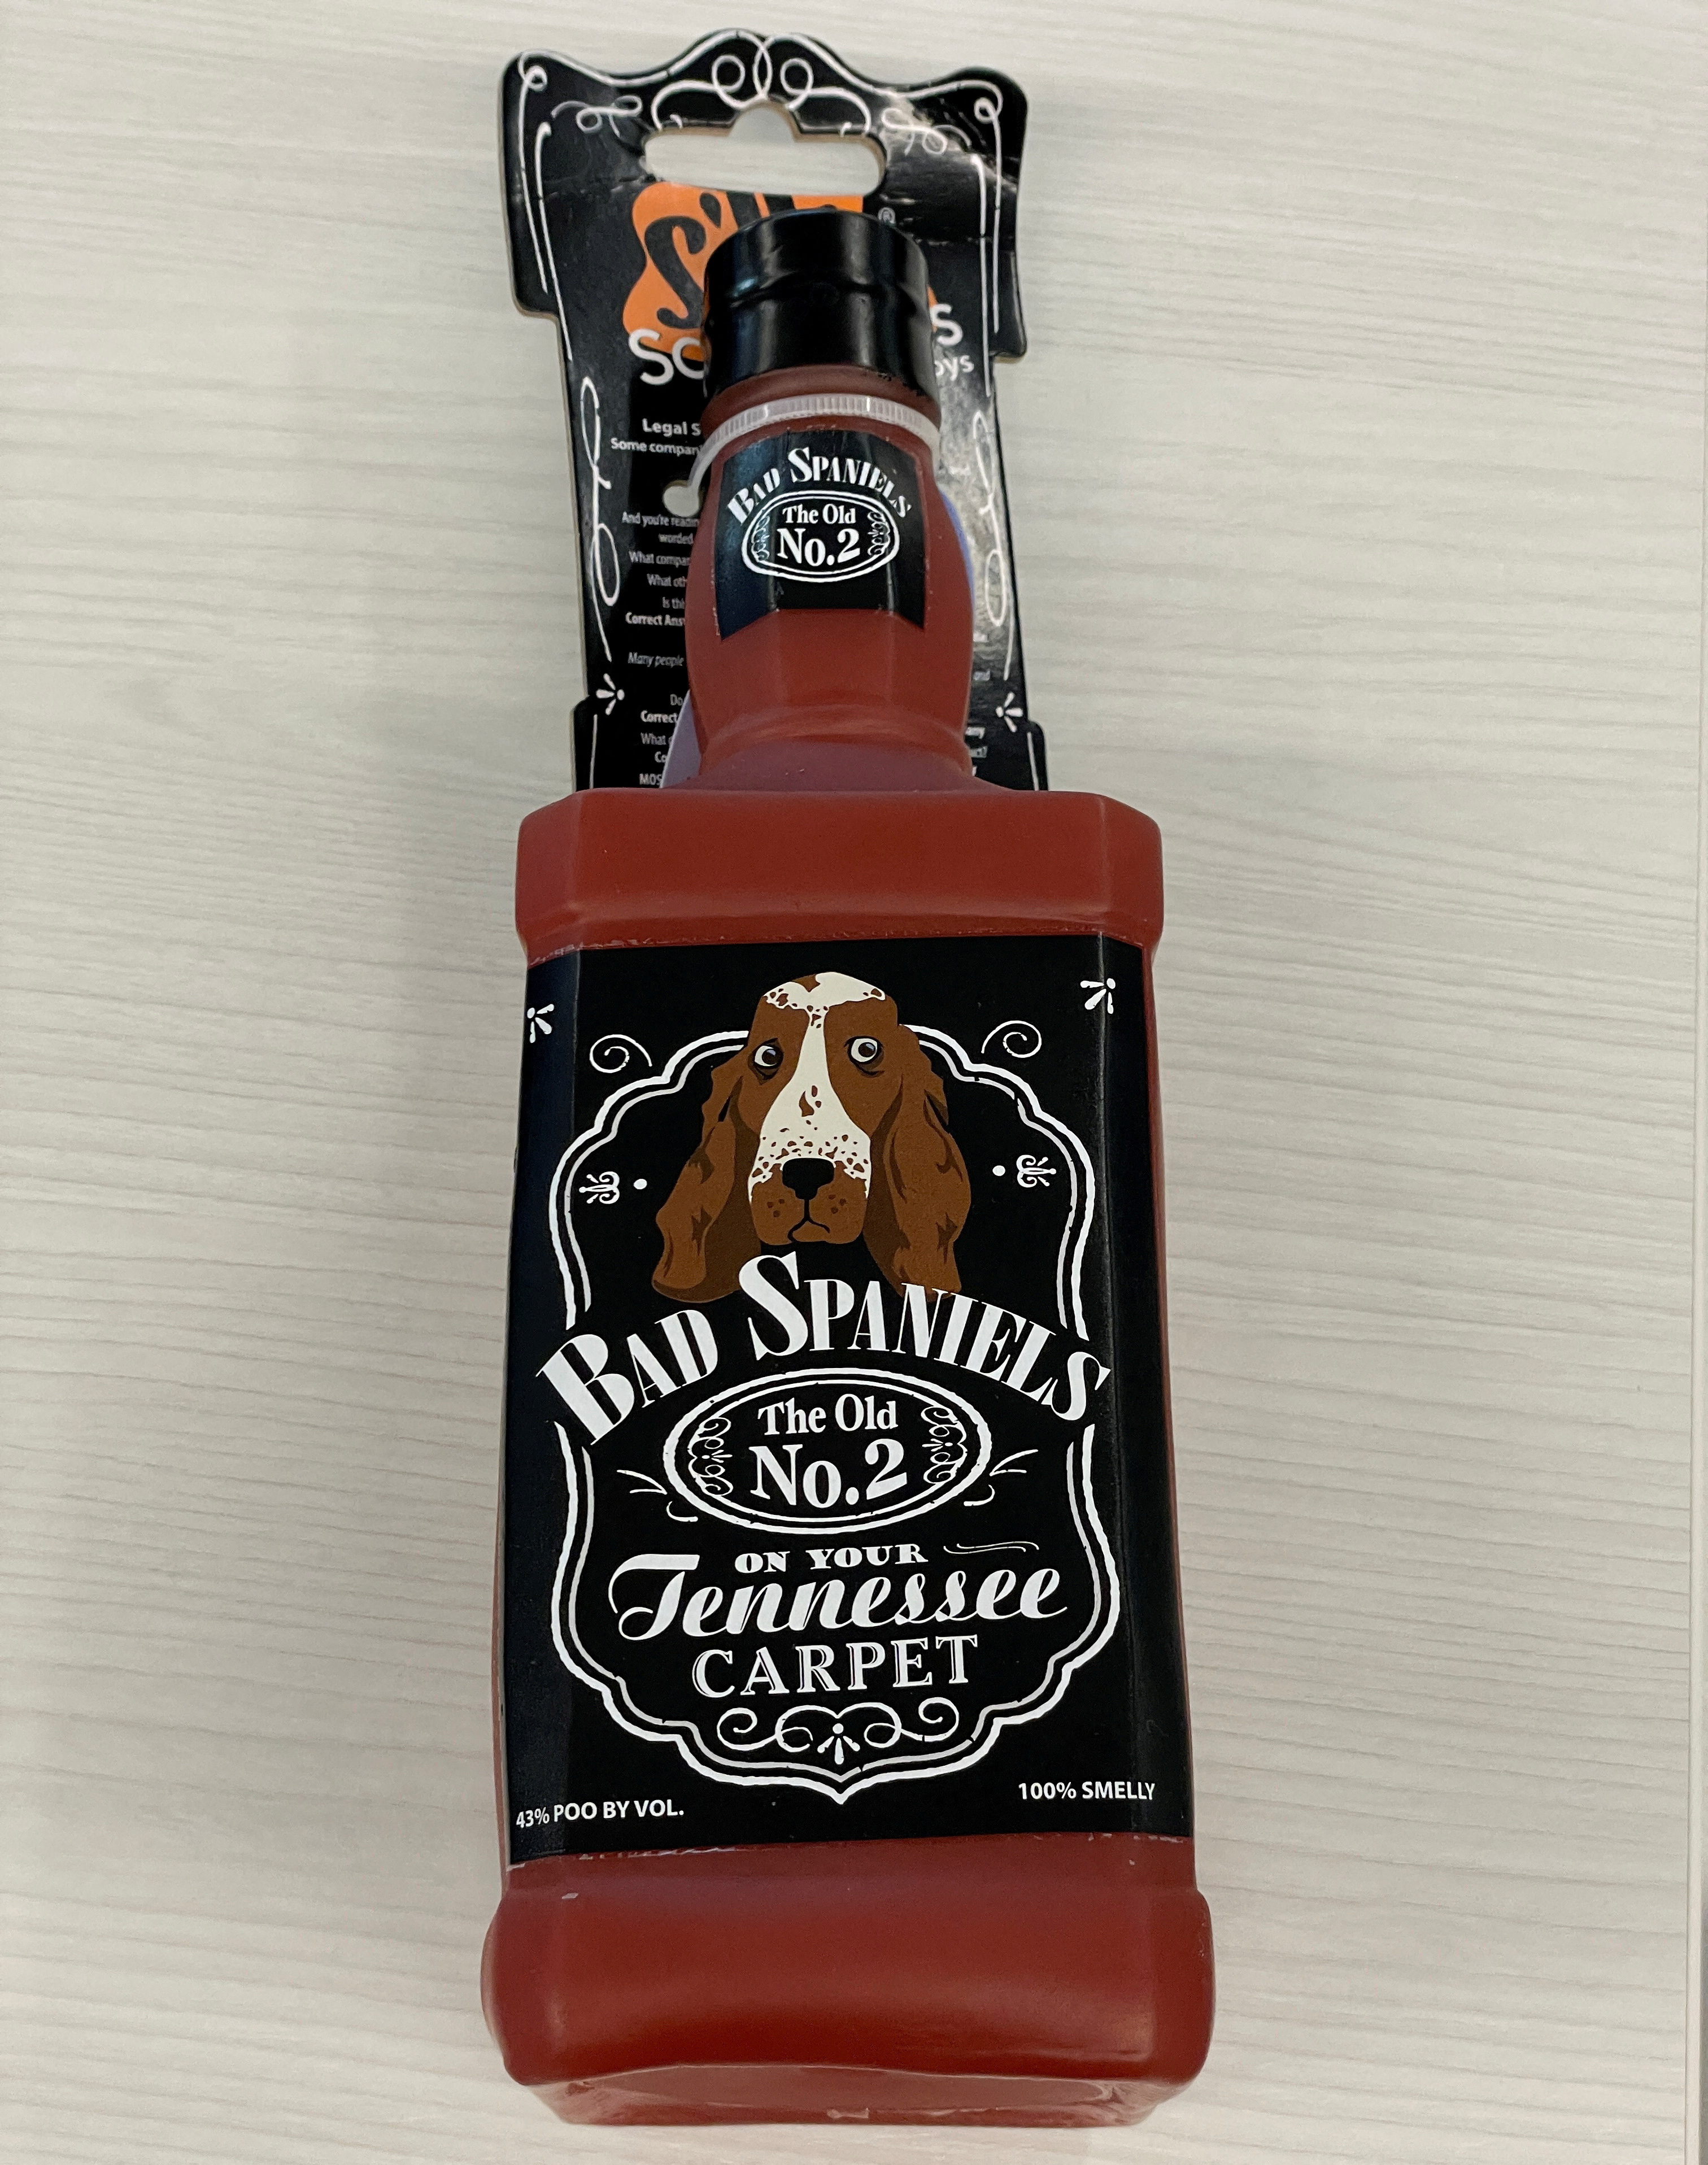 A dog toy called “Bad Spaniels,” shaped like a Jack Daniel's whiskey bottle, is at the center of a trademark dispute that will go before the U.S. Supreme Court in Washington